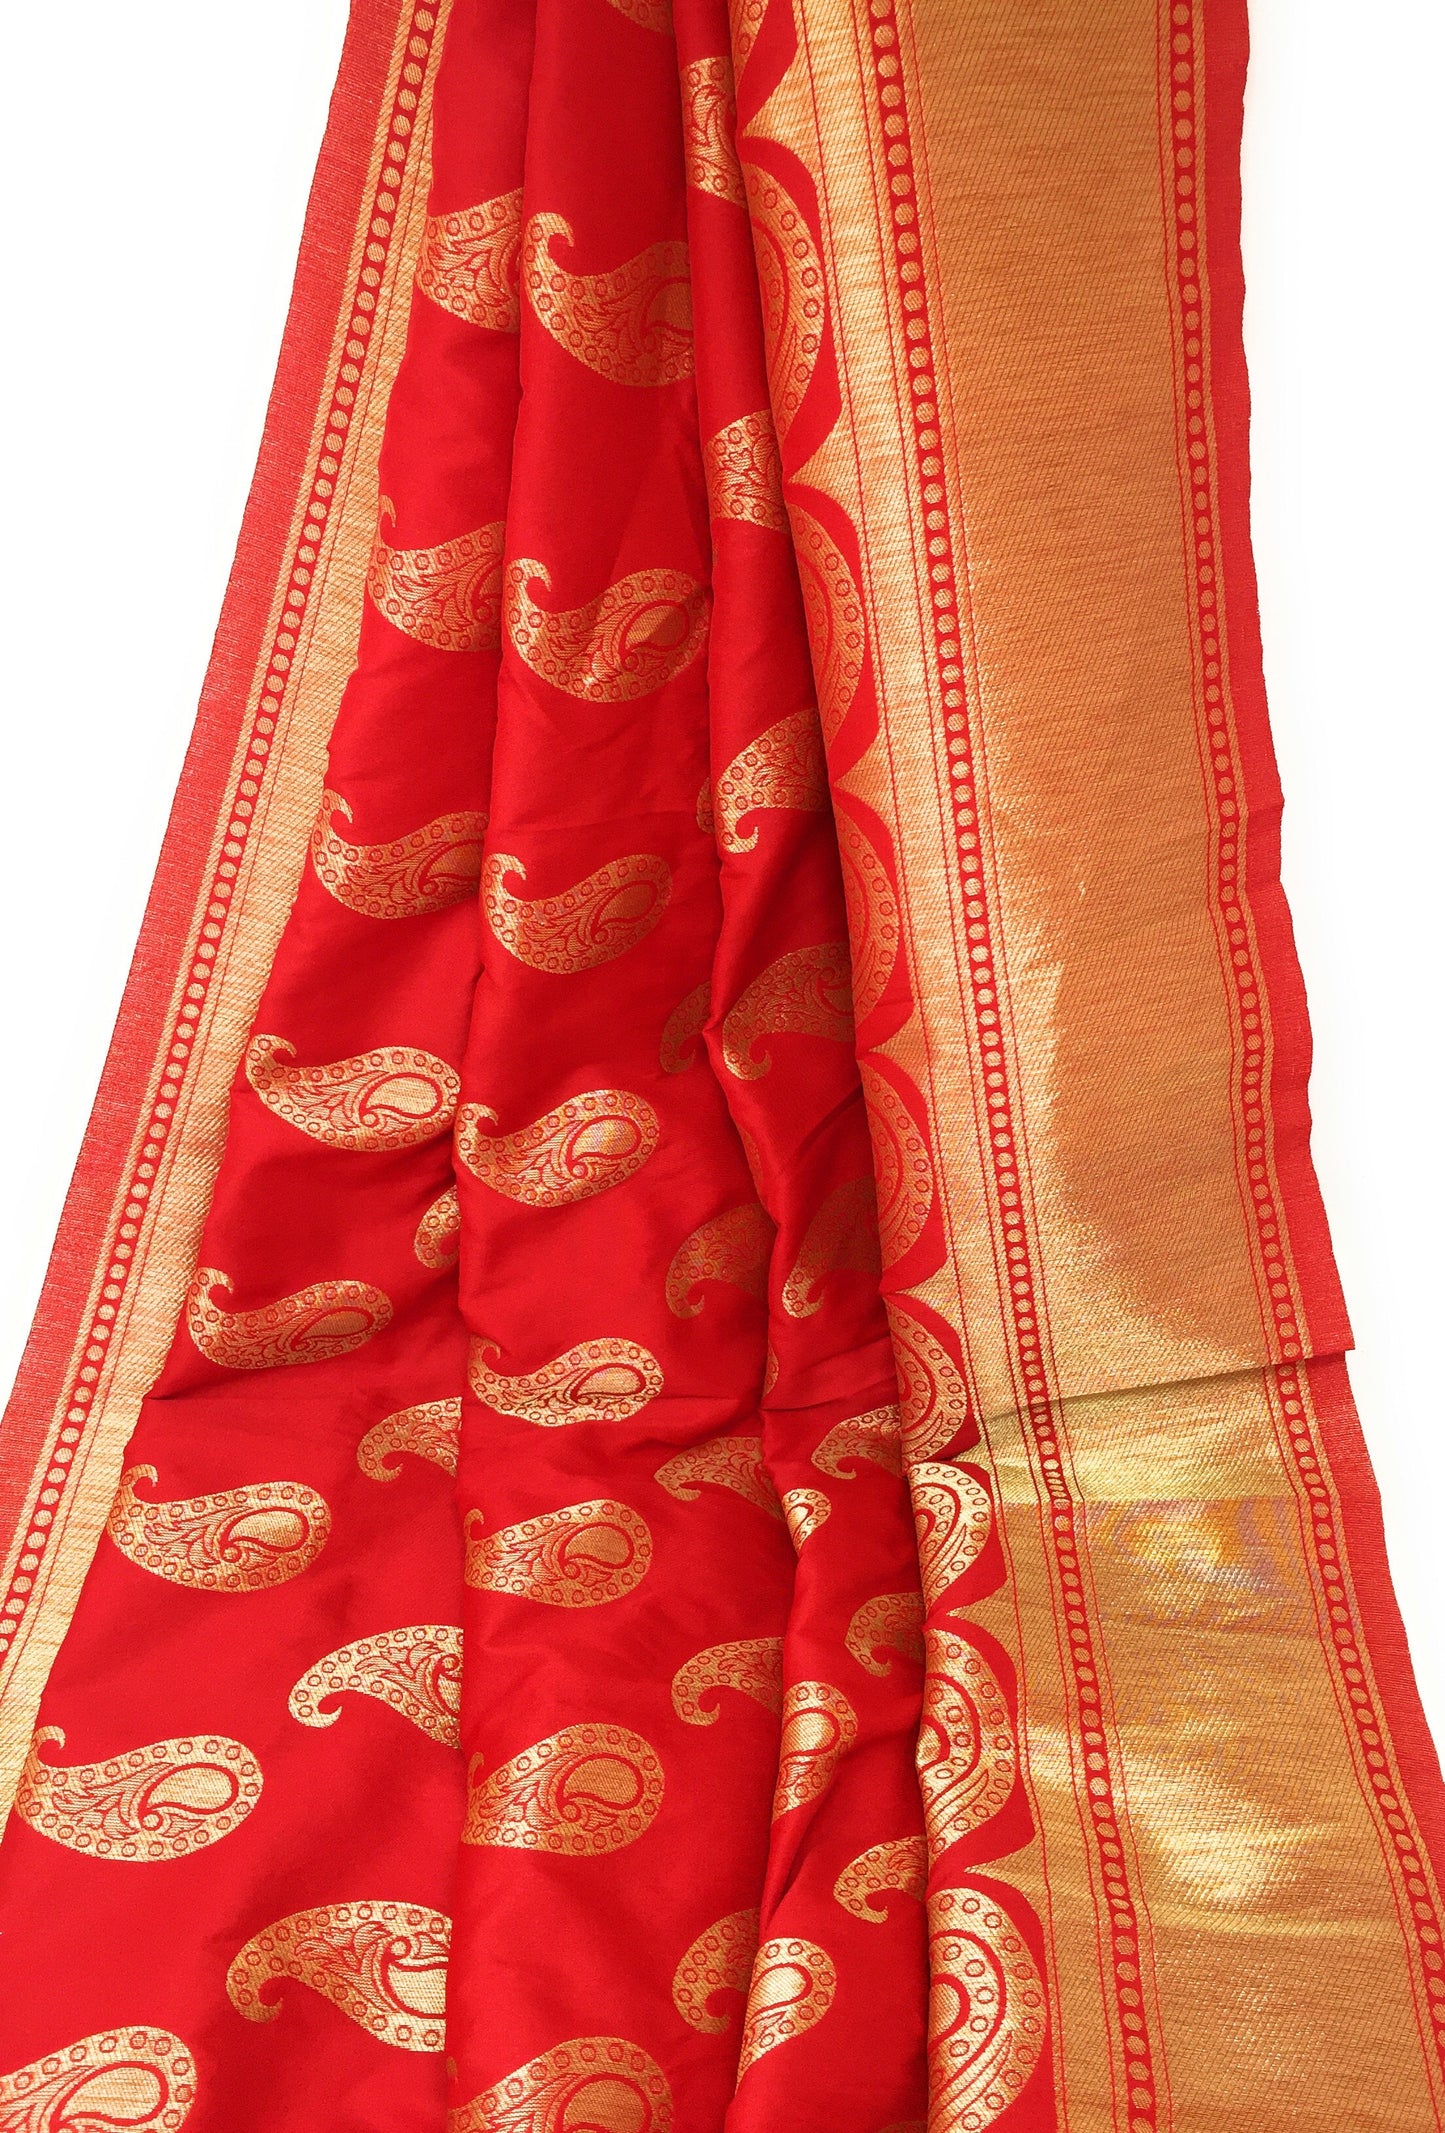 Red Brocade Fabric With Gold Paisley Motifs N Gold Border  